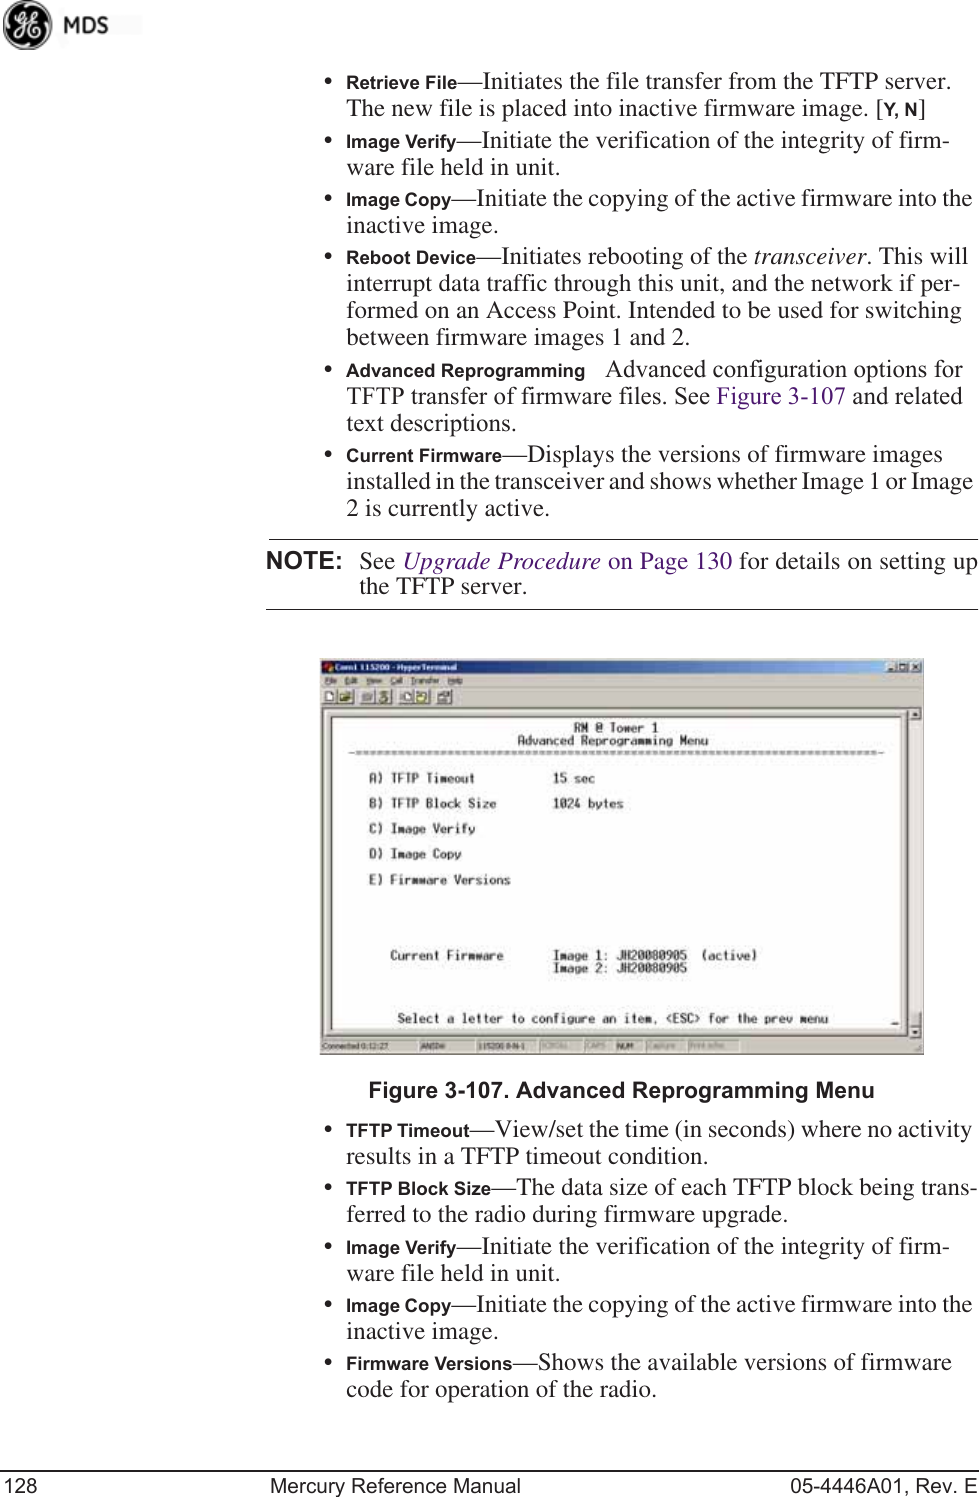 128 Mercury Reference Manual 05-4446A01, Rev. E•Retrieve File—Initiates the file transfer from the TFTP server. The new file is placed into inactive firmware image. [Y, N ]•Image Verify—Initiate the verification of the integrity of firm-ware file held in unit.•Image Copy—Initiate the copying of the active firmware into the inactive image.•Reboot Device—Initiates rebooting of the transceiver. This will interrupt data traffic through this unit, and the network if per-formed on an Access Point. Intended to be used for switching between firmware images 1 and 2.•Advanced ReprogrammingAdvanced configuration options for TFTP transfer of firmware files. See Figure 3-107 and related text descriptions.•Current Firmware—Displays the versions of firmware images installed in the transceiver and shows whether Image 1 or Image 2 is currently active.NOTE: See Upgrade Procedure on Page 130 for details on setting upthe TFTP server.Invisible place holderFigure 3-107. Advanced Reprogramming Menu•TFTP Timeout—View/set the time (in seconds) where no activity results in a TFTP timeout condition.•TFTP Block Size—The data size of each TFTP block being trans-ferred to the radio during firmware upgrade.•Image Verify—Initiate the verification of the integrity of firm-ware file held in unit.•Image Copy—Initiate the copying of the active firmware into the inactive image.•Firmware Versions—Shows the available versions of firmware code for operation of the radio.